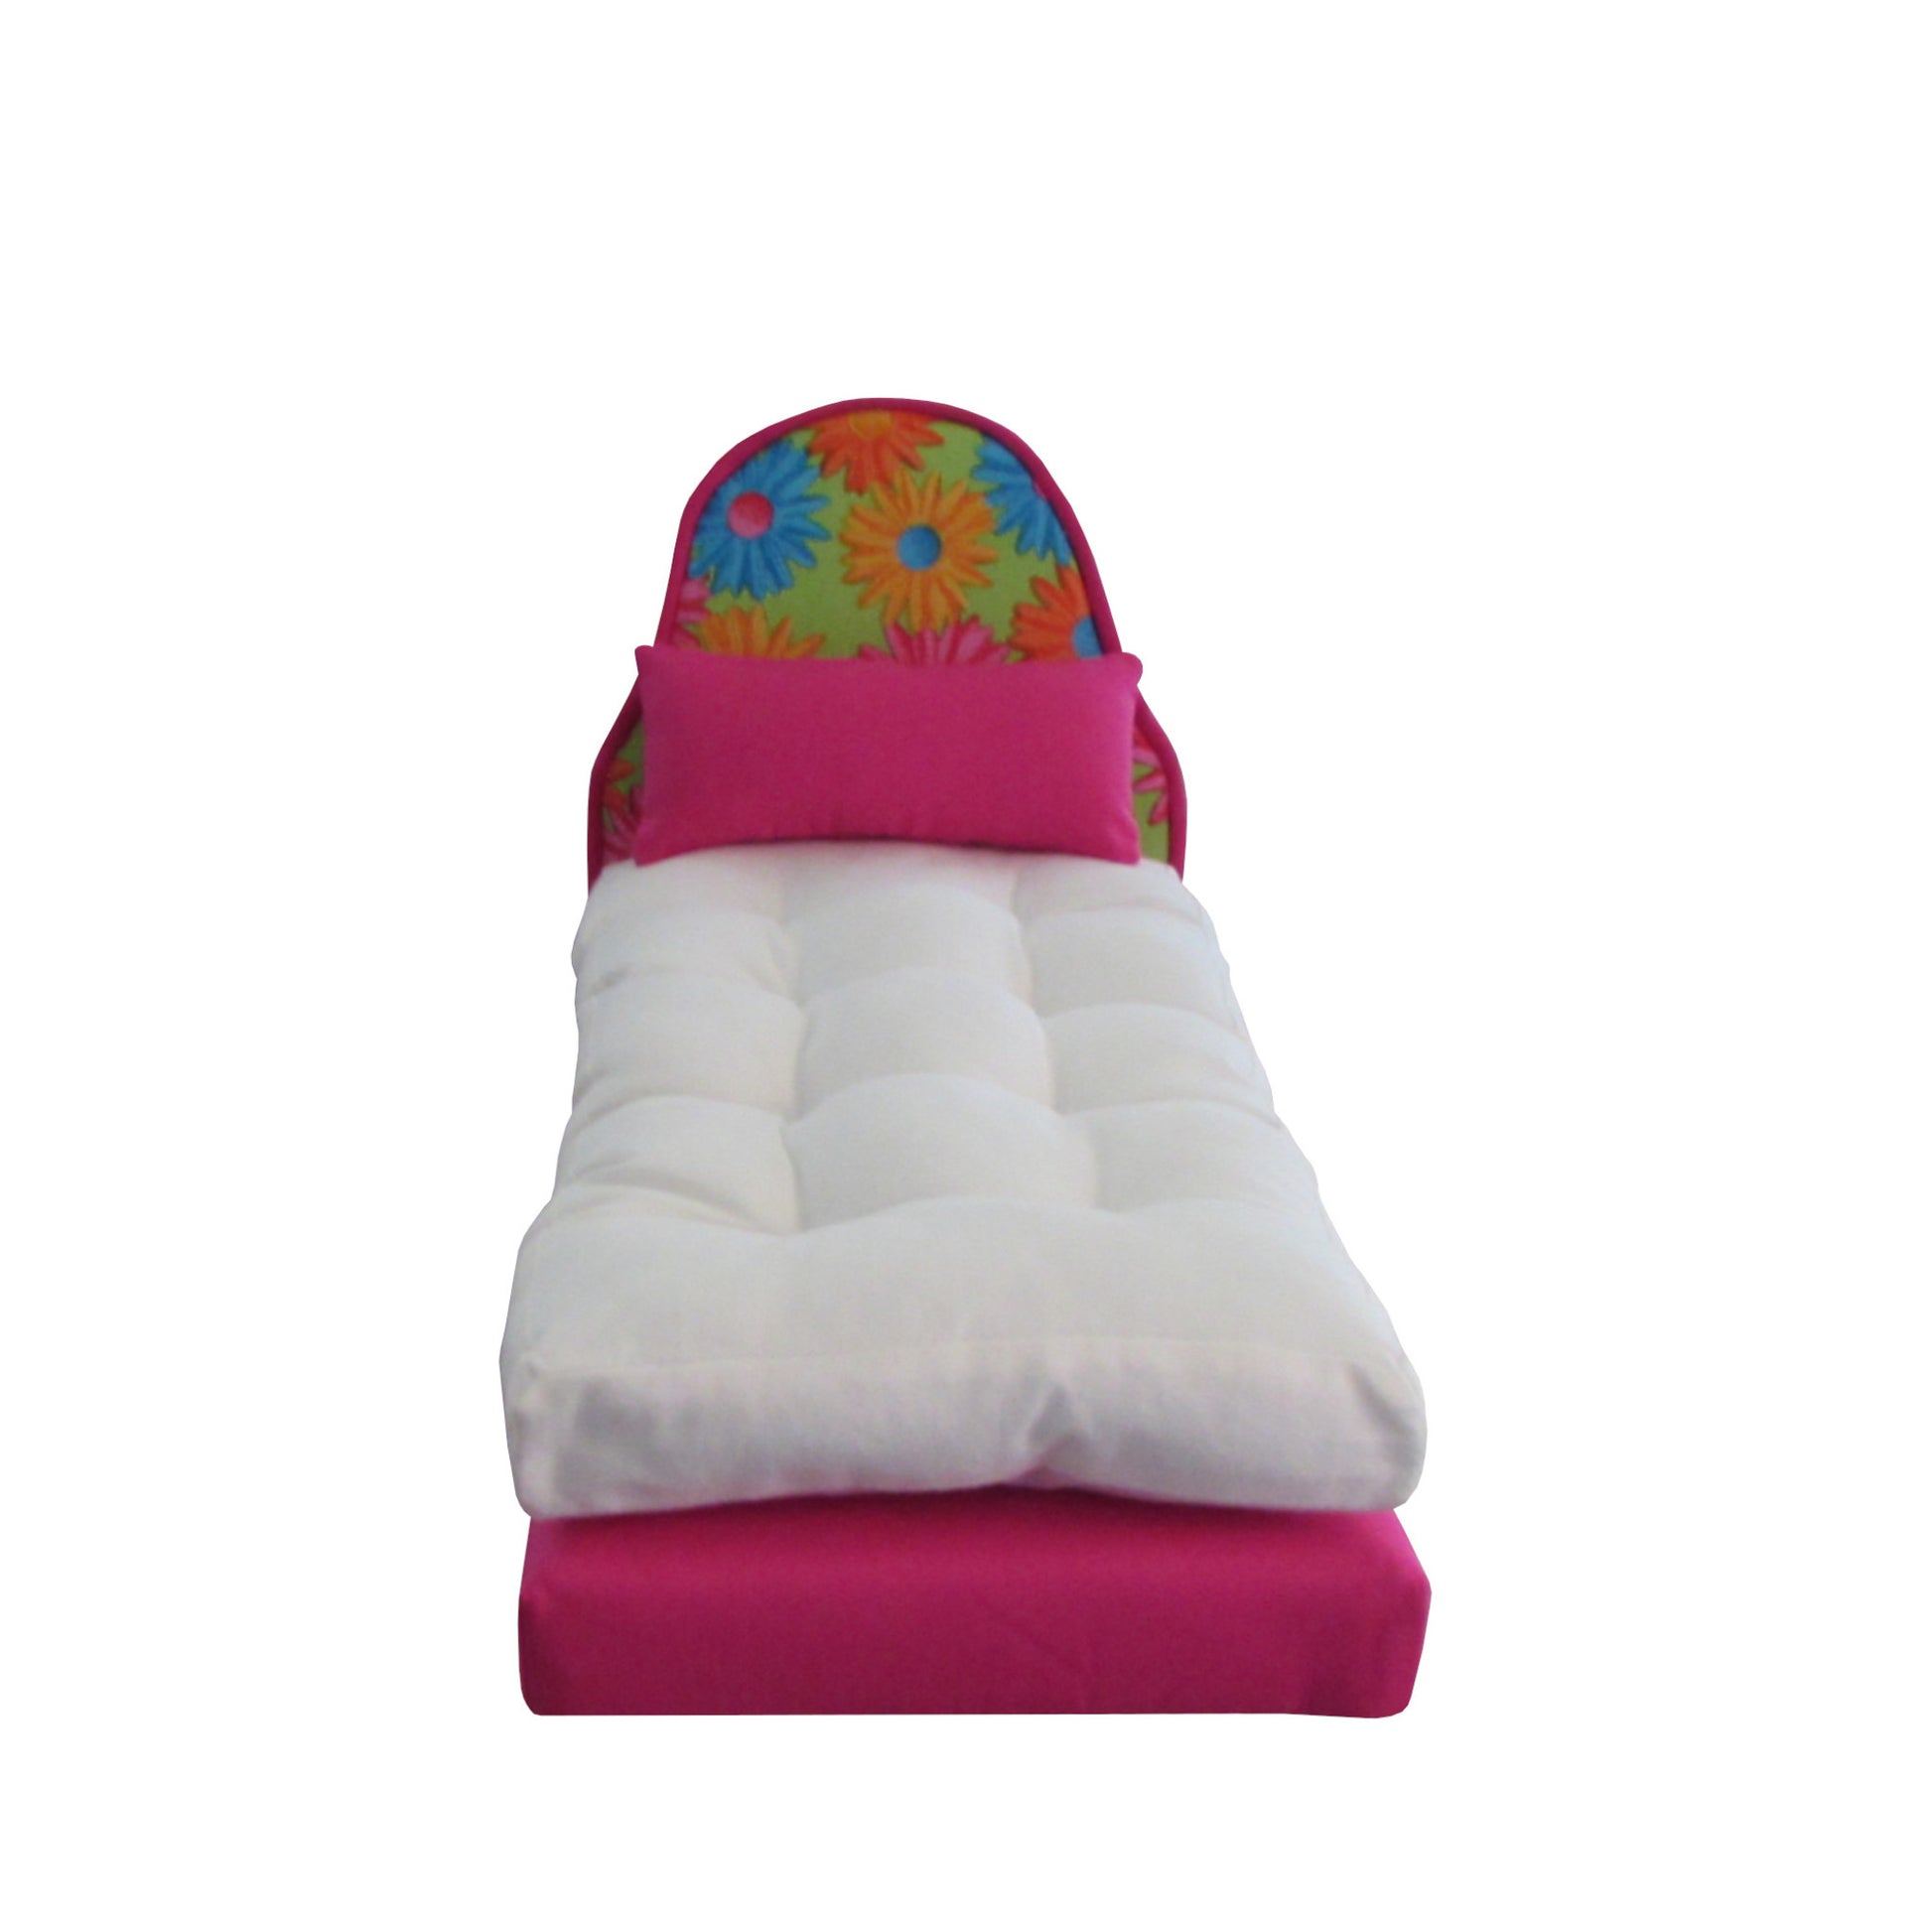 Bright Pink Doll Bed with Orange Turquoise Floral Headboard, Pillow, and Mattress for 11.5-inch and 12-inch dolls Front view